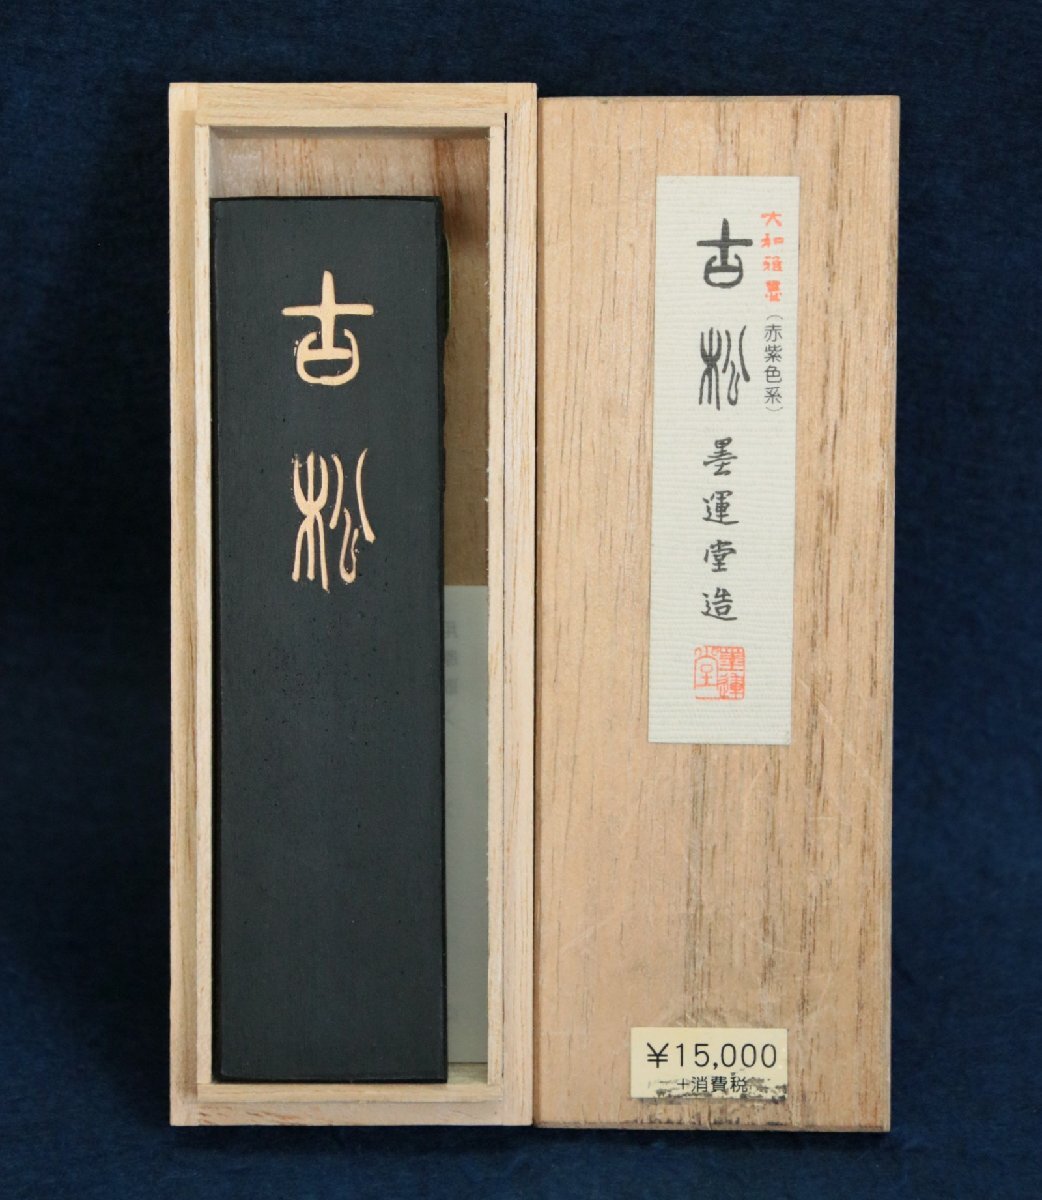  japanese old .... structure old pine 68g original plant .. pine pine smoke . Heisei era 6 year made regular price 15000 jpy also box stationery writing . four . calligraphy supplies painting materials unused goods 